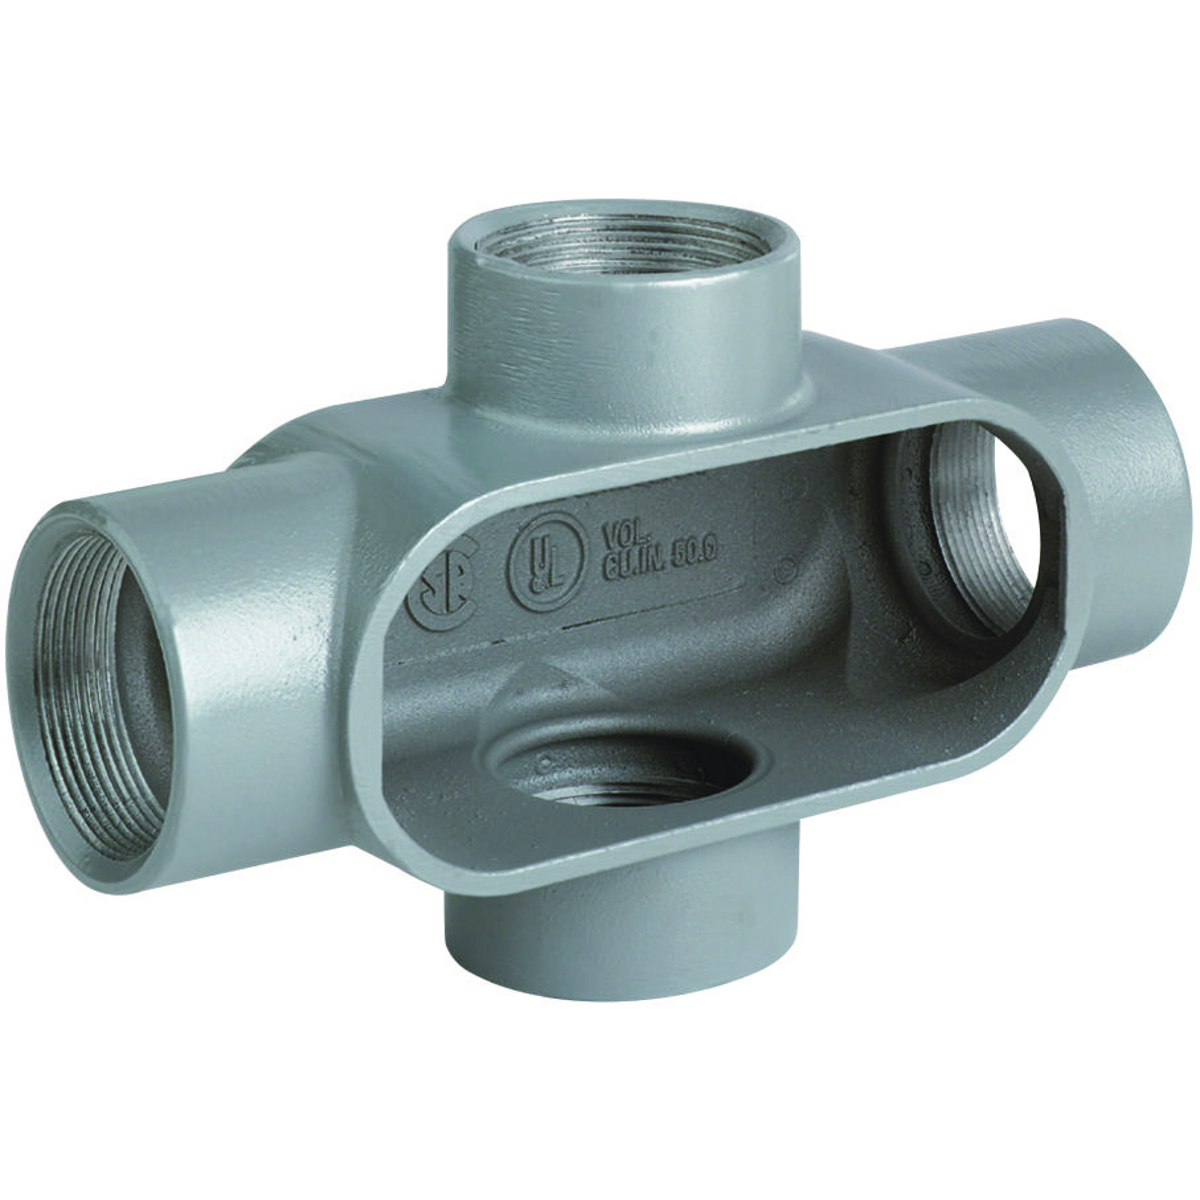 DURALOY 7 SERIES - IRON CONDUIT BODY - X TYPE - HUB SIZE 3/4 INCH -VOLUME 9.5 CUBIC INCHES